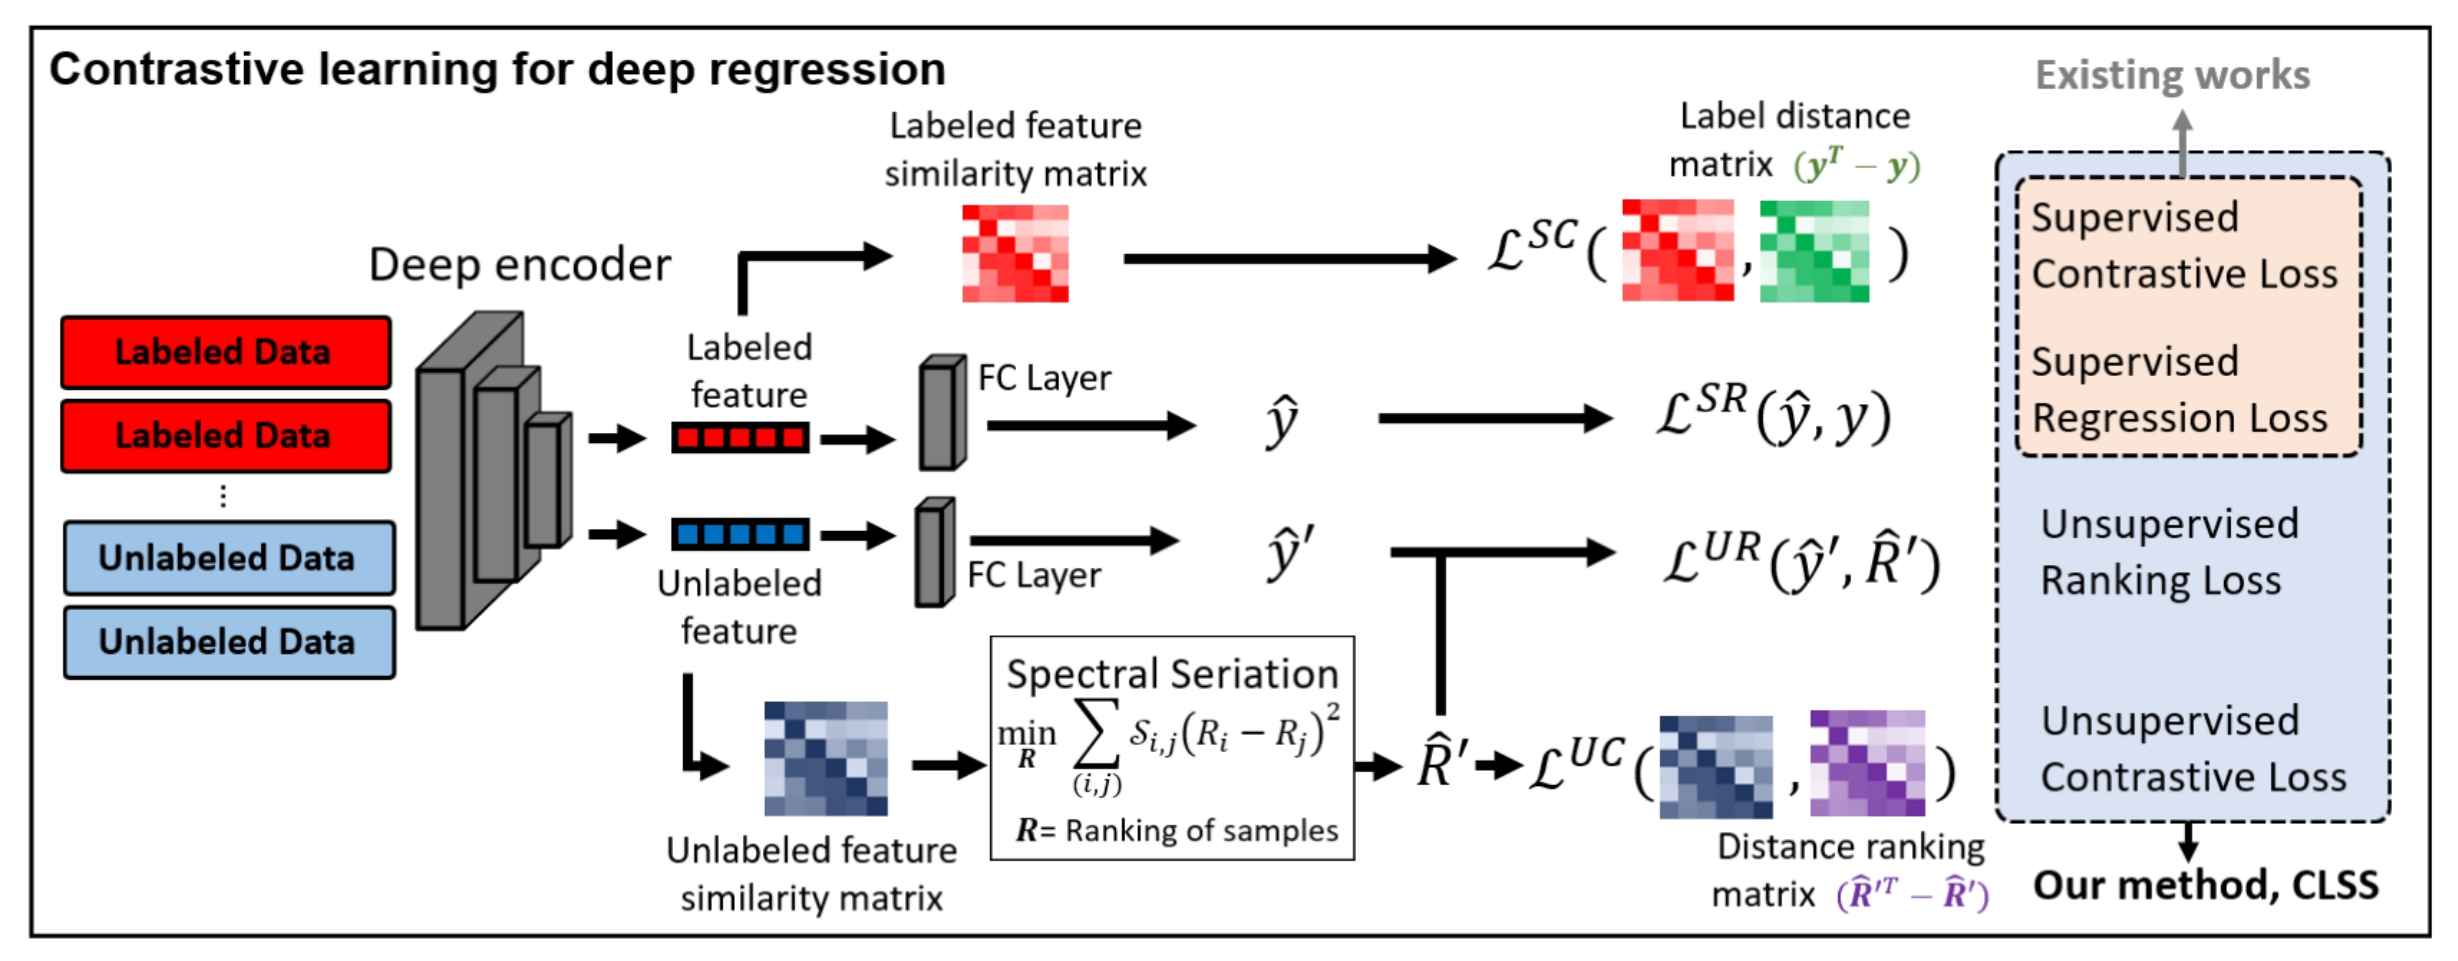 Semi-Supervised Contrastive Learning for Deep Regression with Ordinal Rankings from Spectral Seriation